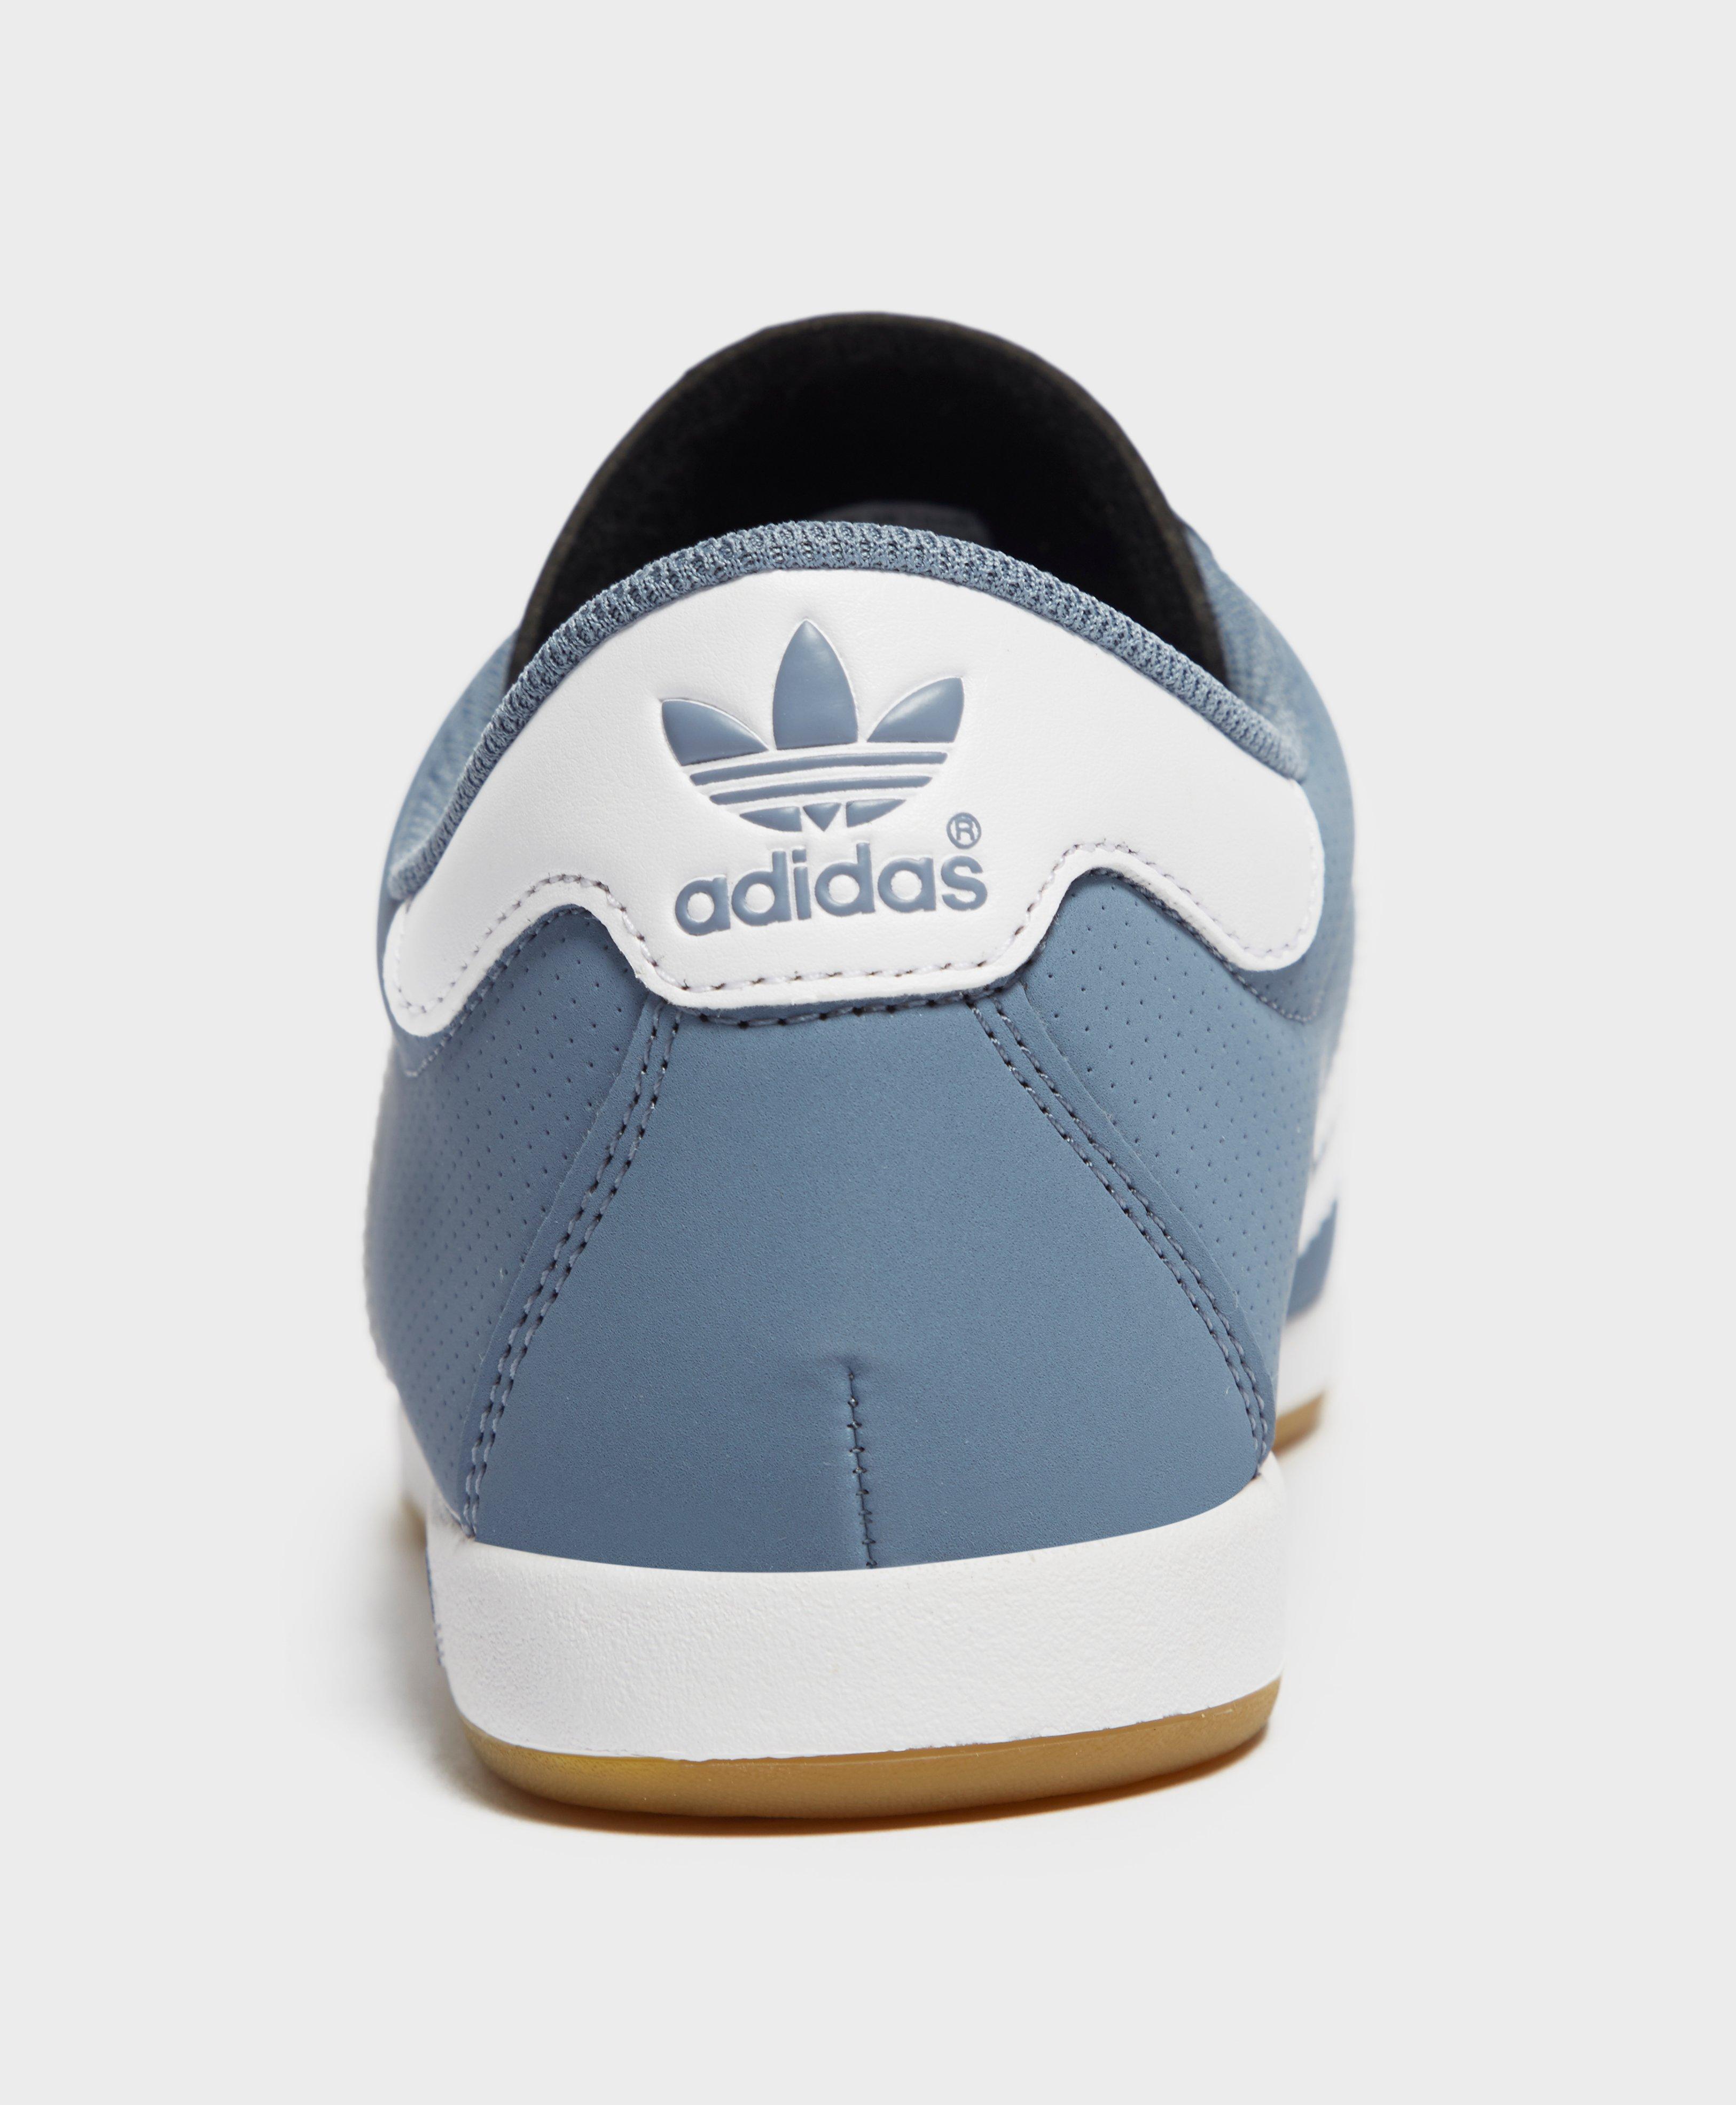 adidas Originals Leather The Sneeker in Blue for Men - Lyst